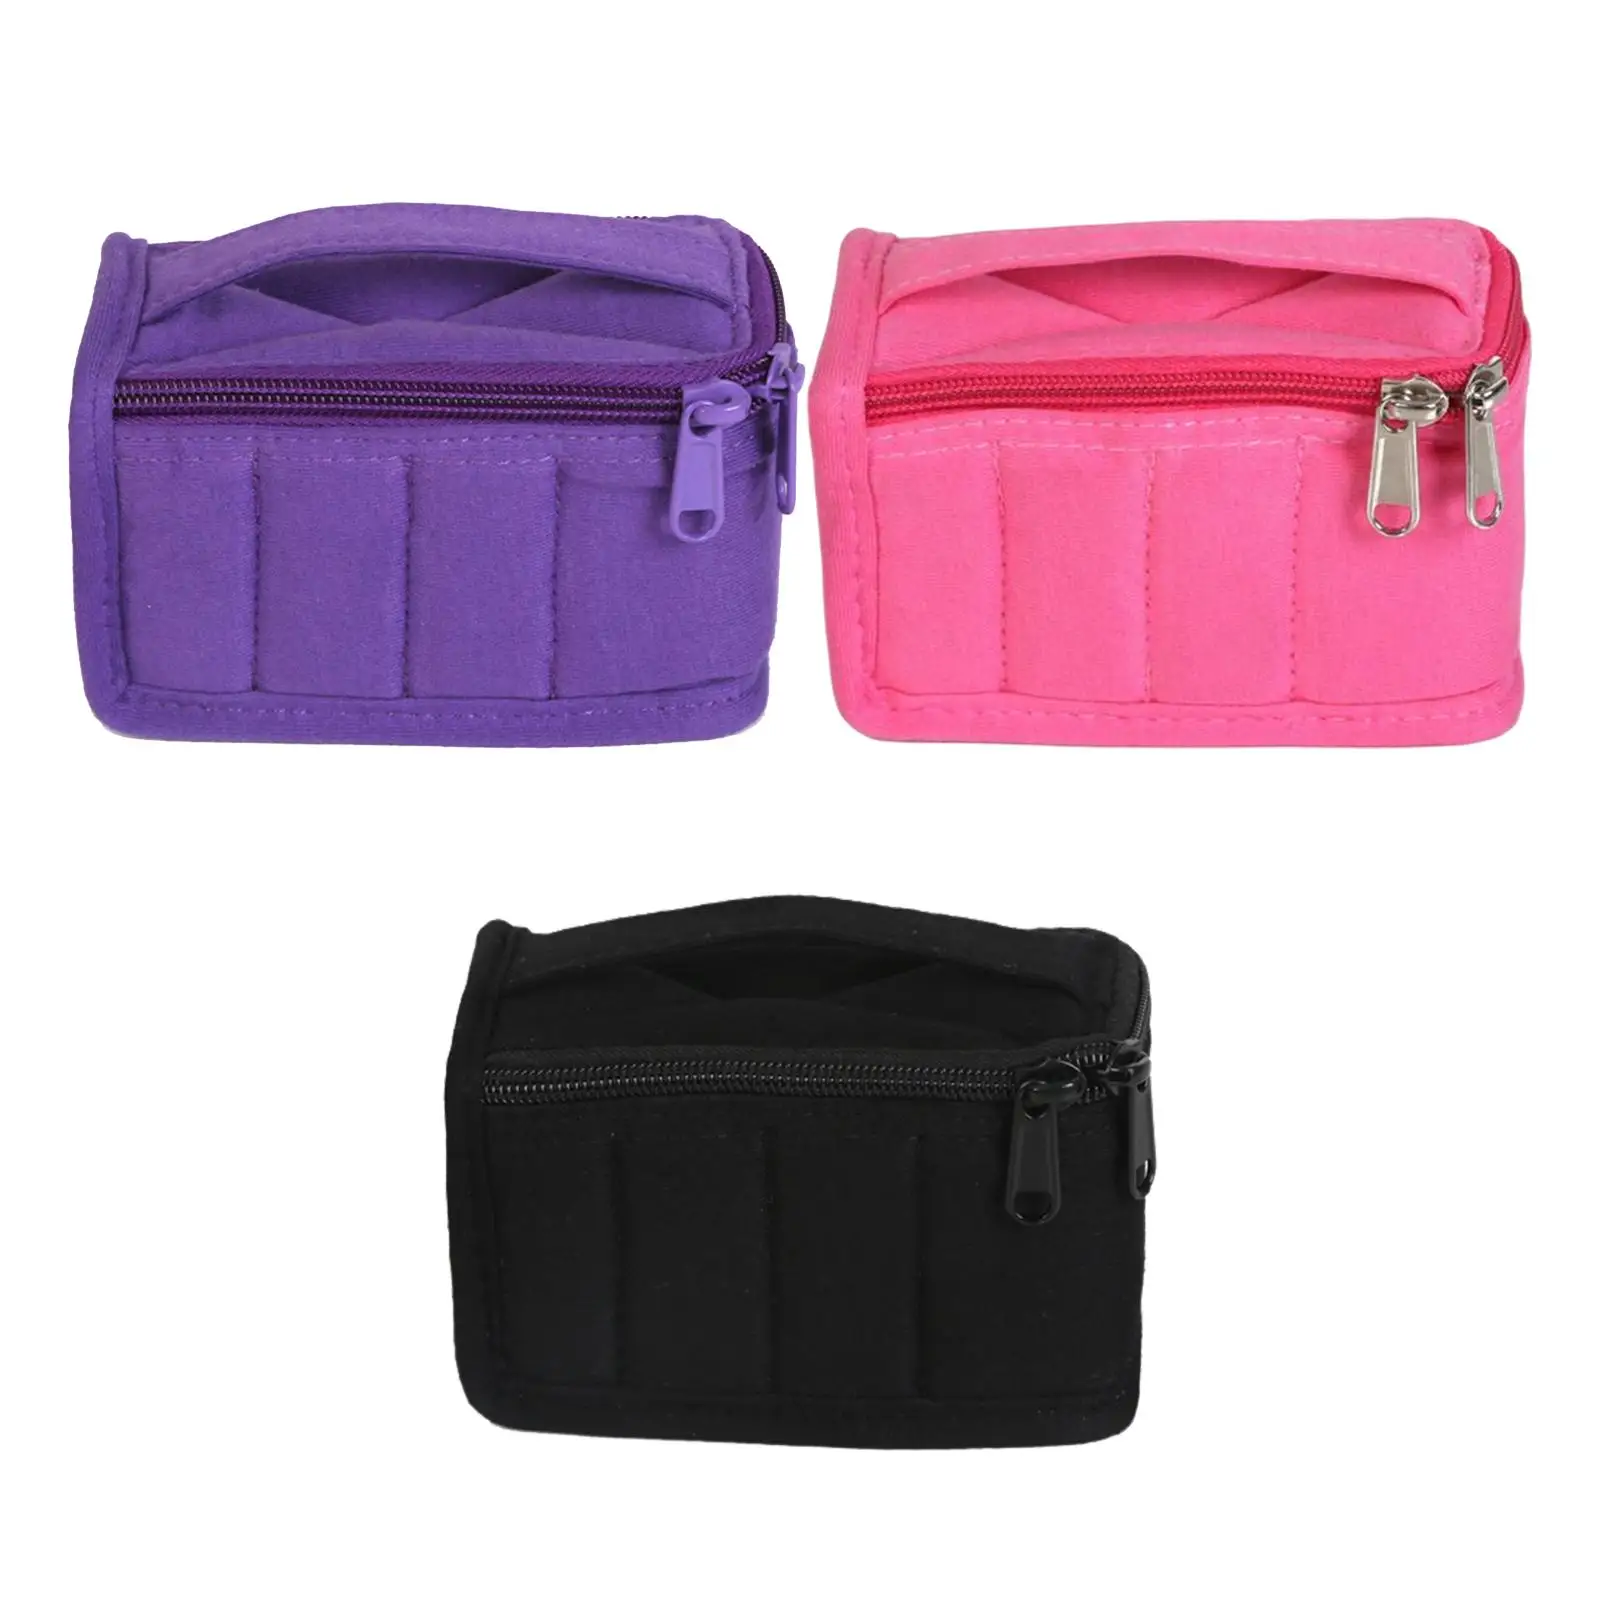 Portable Makeup Bag Accessories Multi Use with Compartment Casual Fashion Cosmetic Organizer for Business Trips Birthday Outdoor